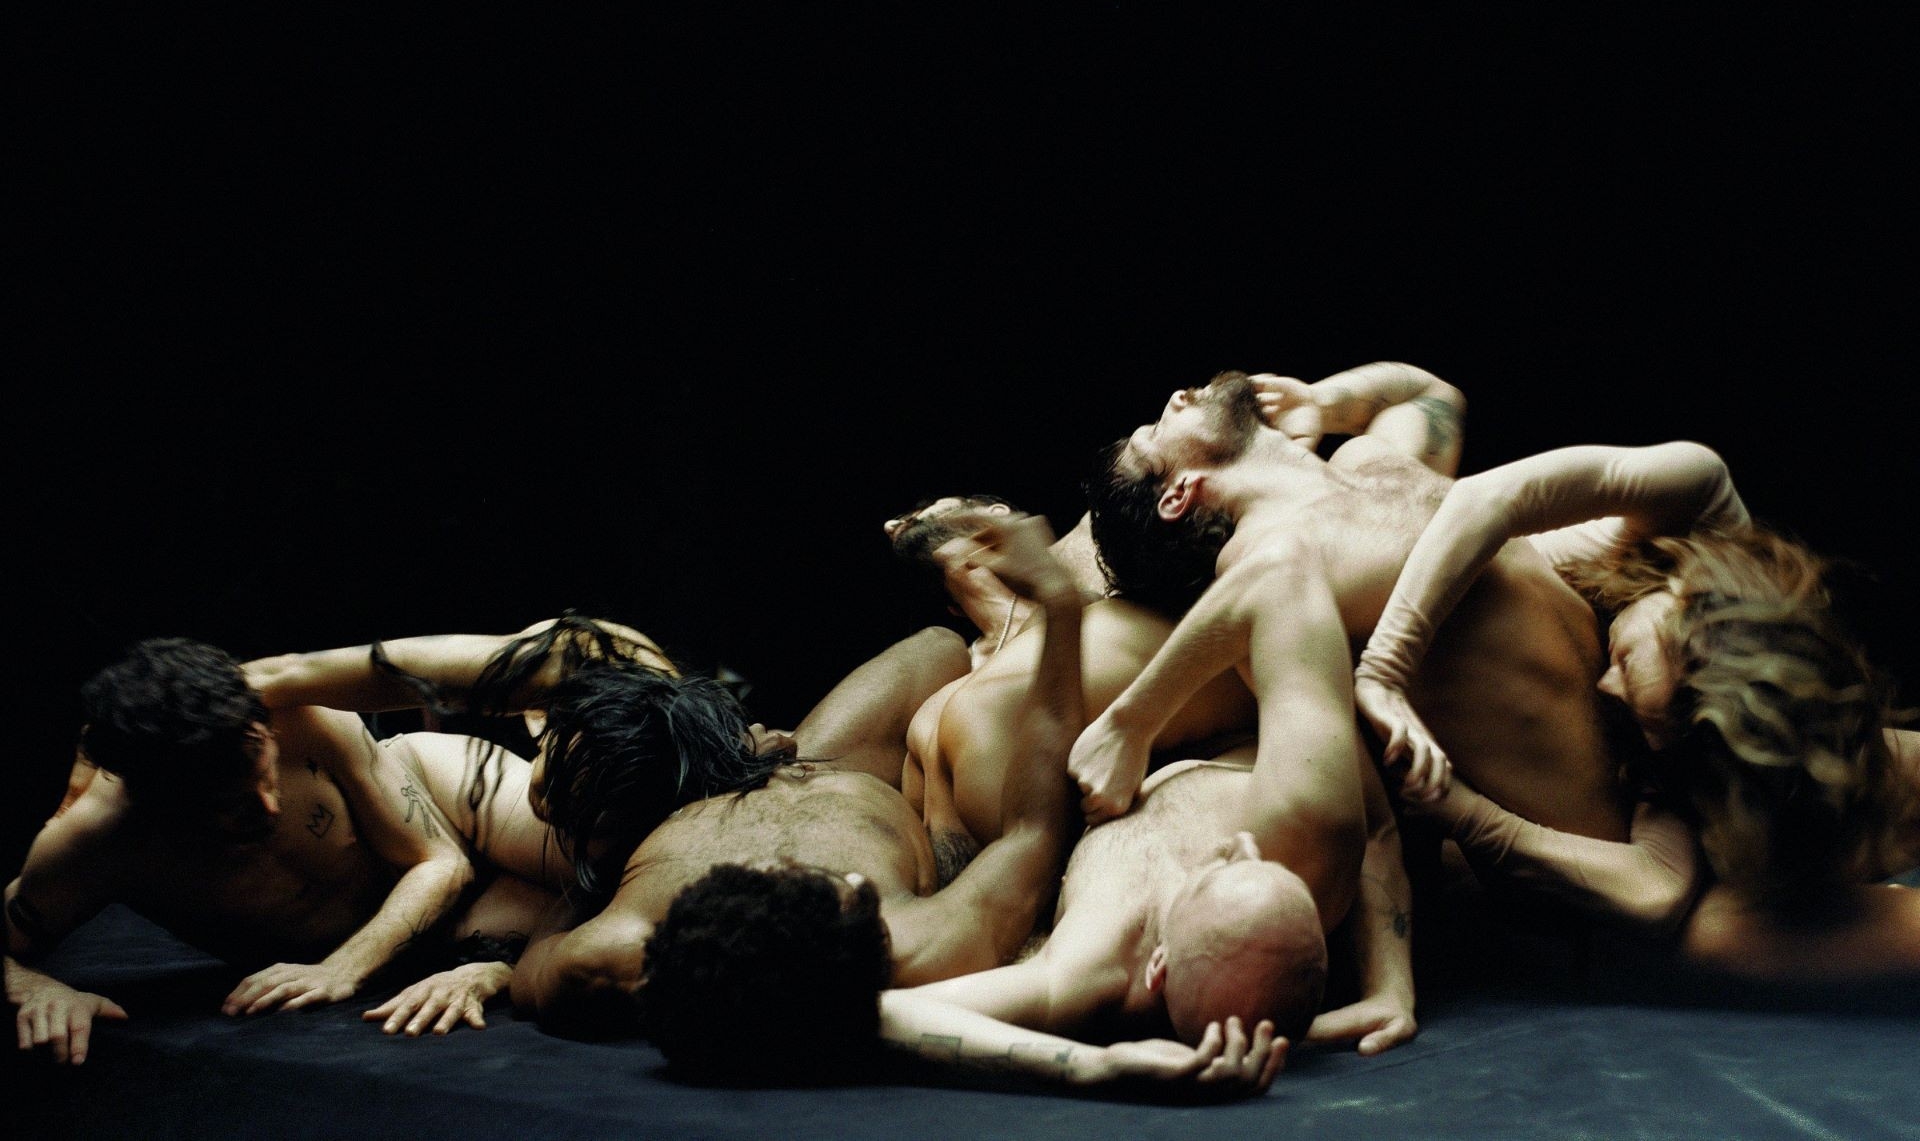 Heap of dancers' bodies with limbs draped over one another, against a black background